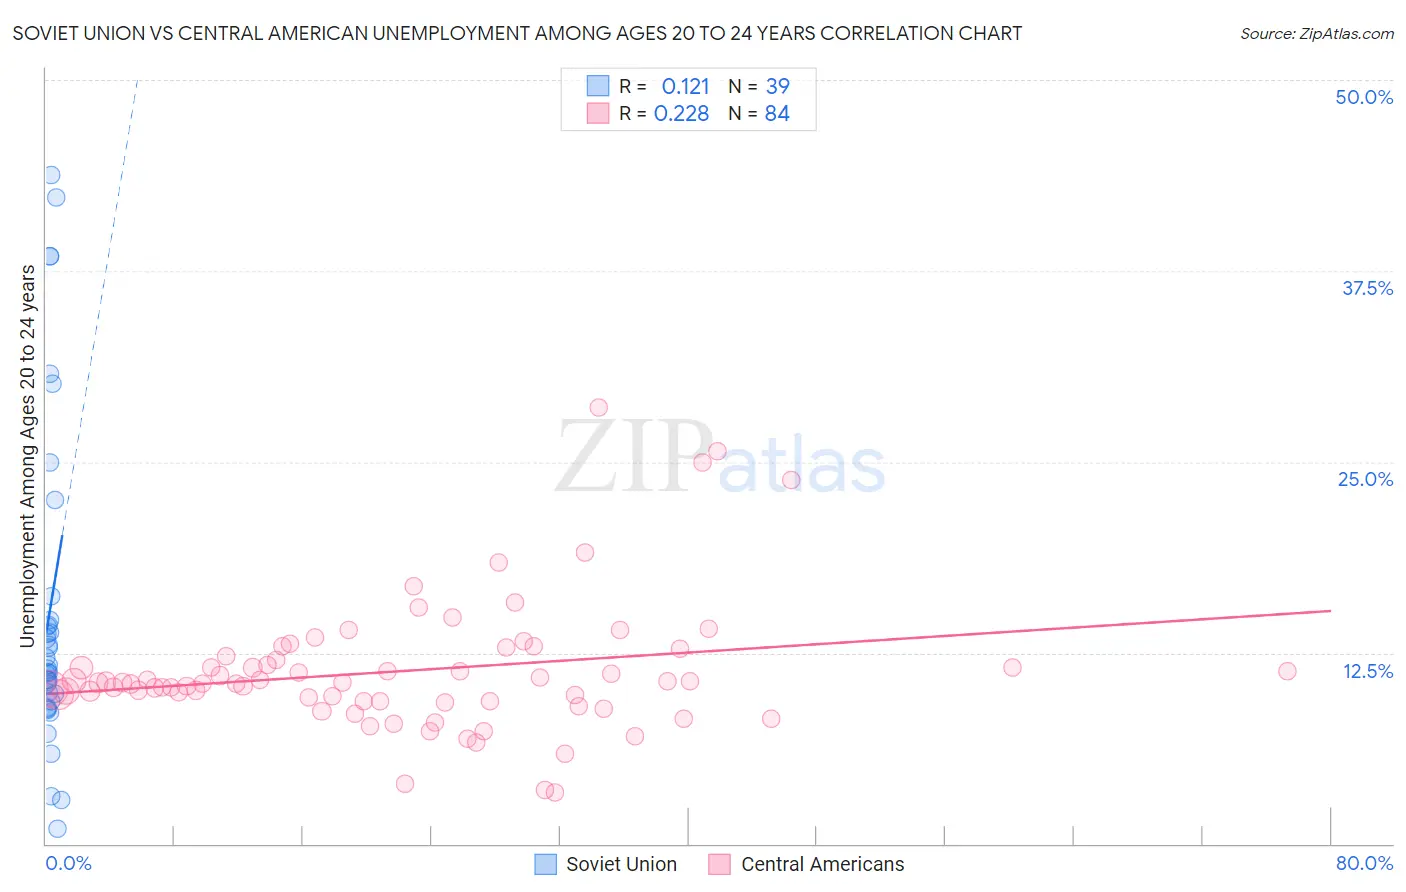 Soviet Union vs Central American Unemployment Among Ages 20 to 24 years